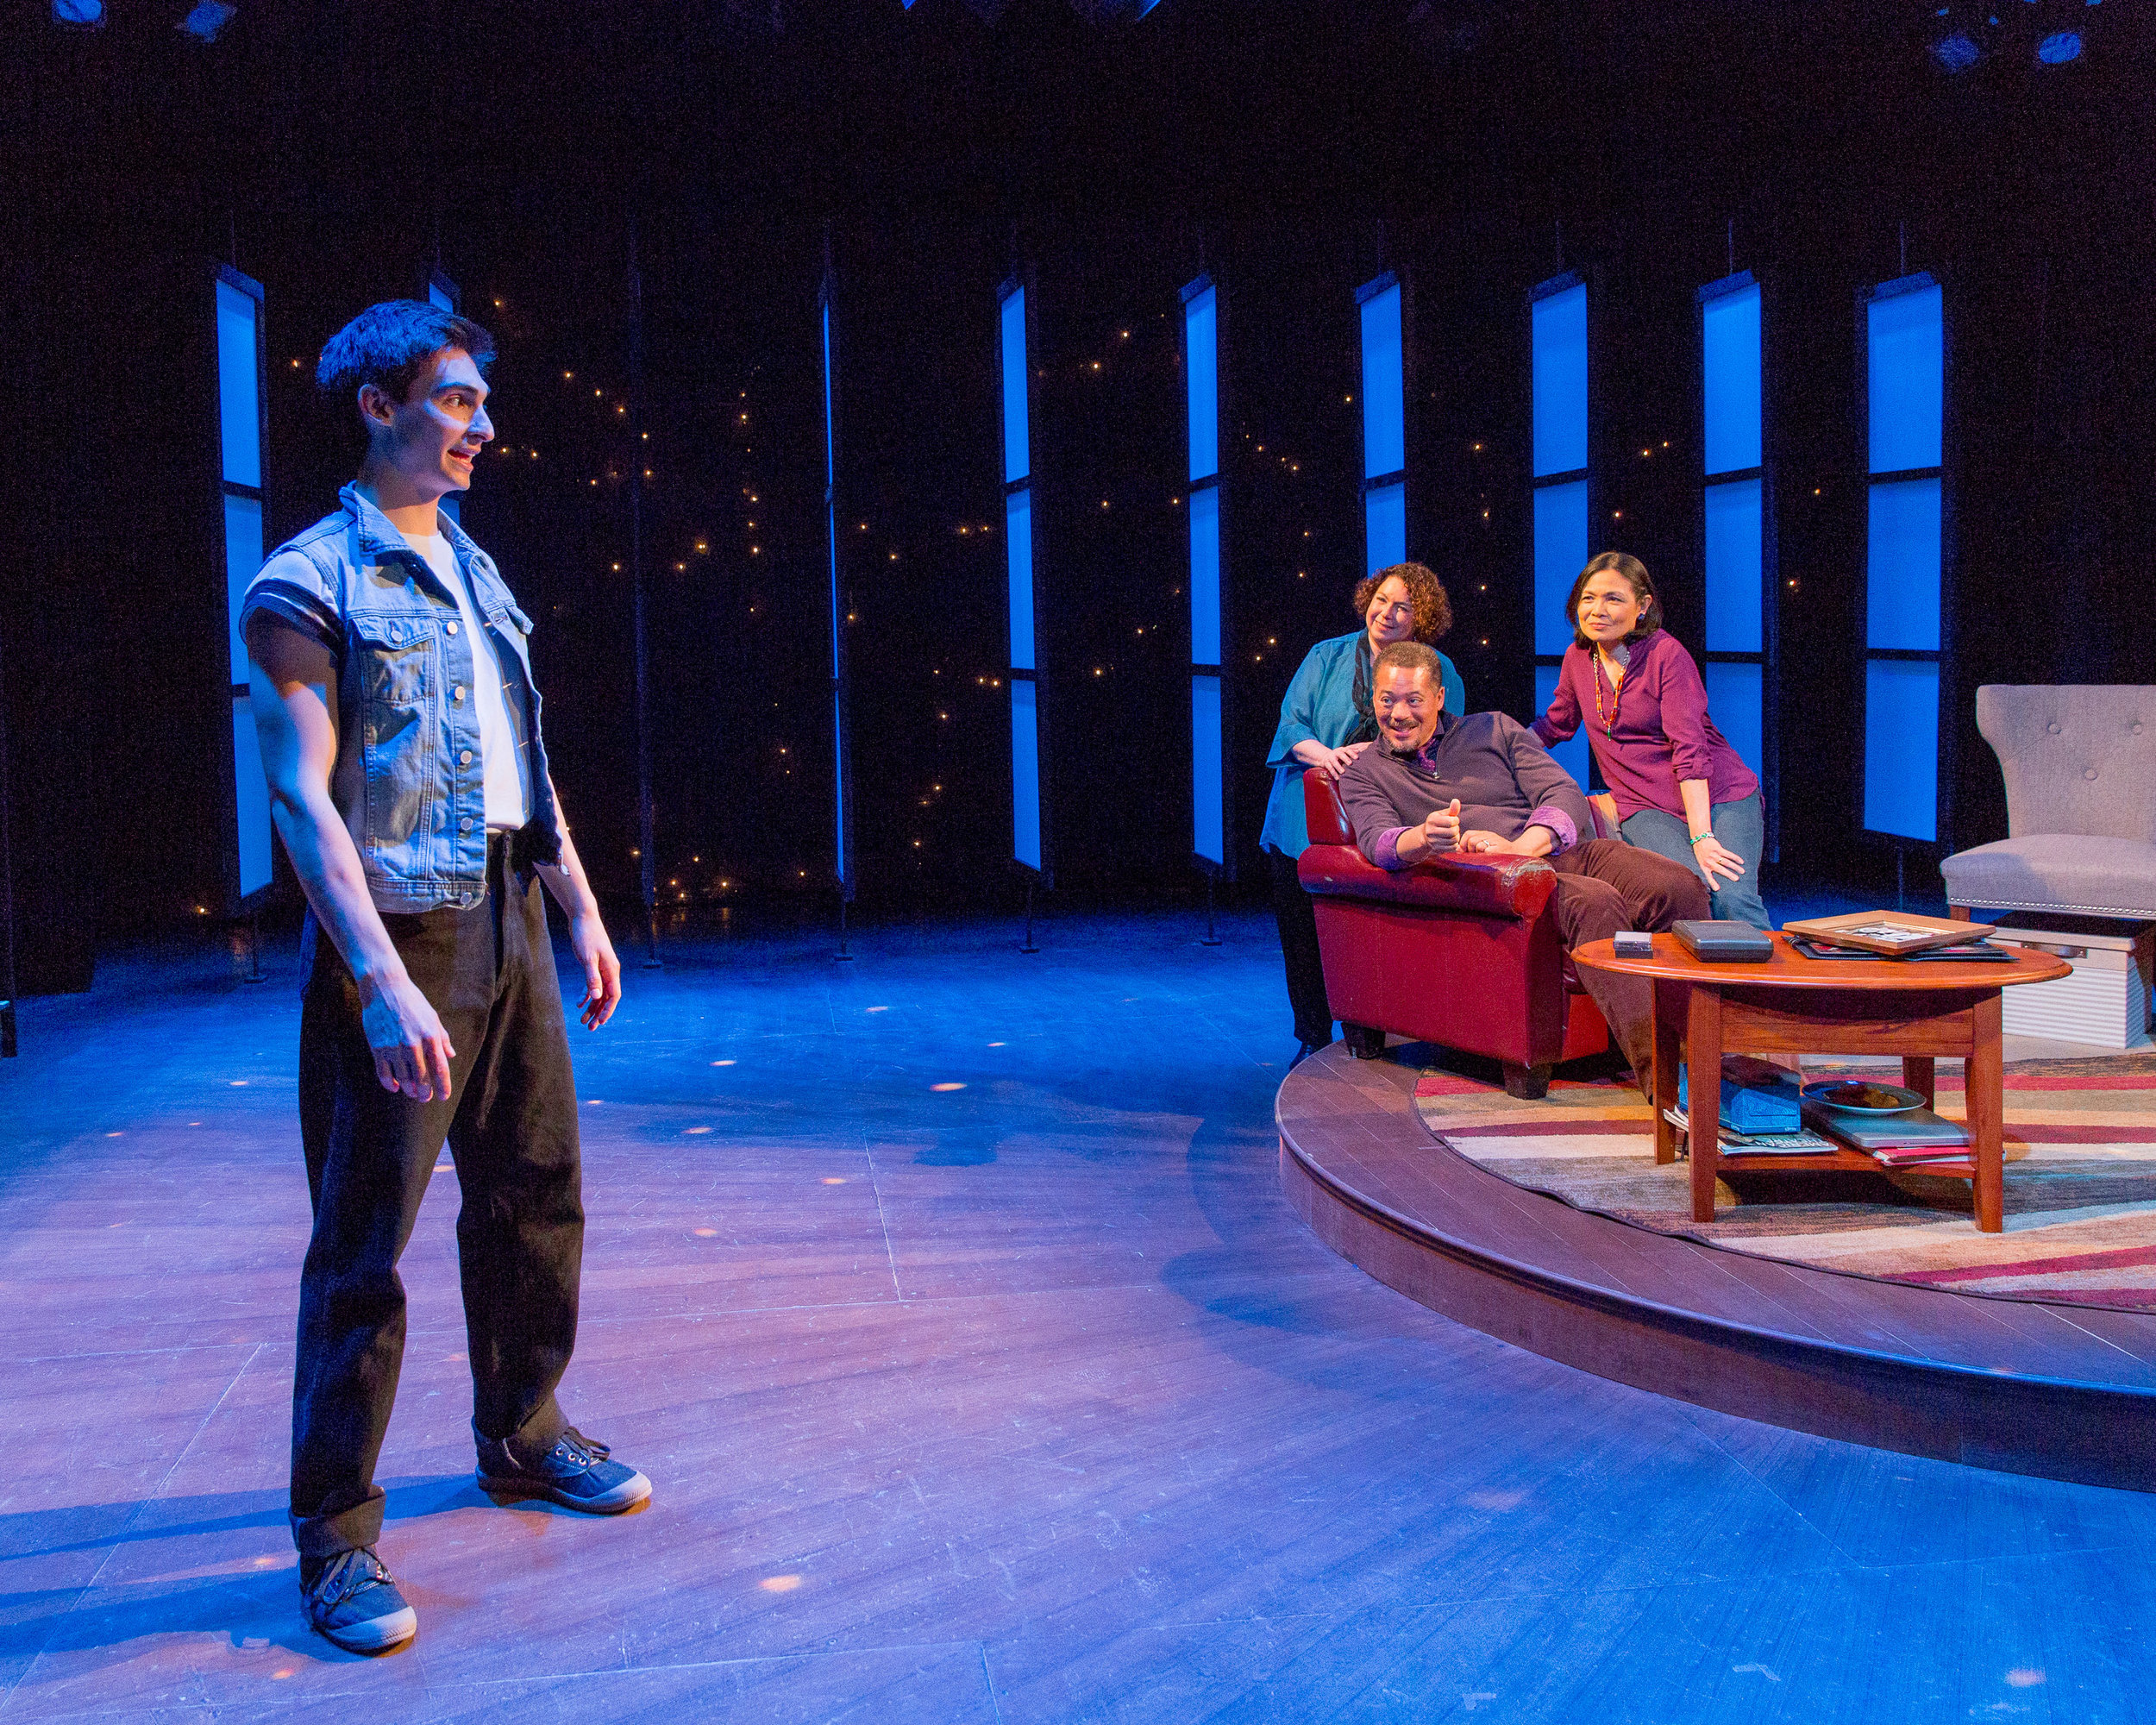    Count Me In  by Rachel Lampert Kitchen Theatre Company World Premiere   Scenic and lighting design by Tyler M. Perry Costume design by Hunter Kaczorowski Sound design by Lesley Greene Photos by George Cannon 